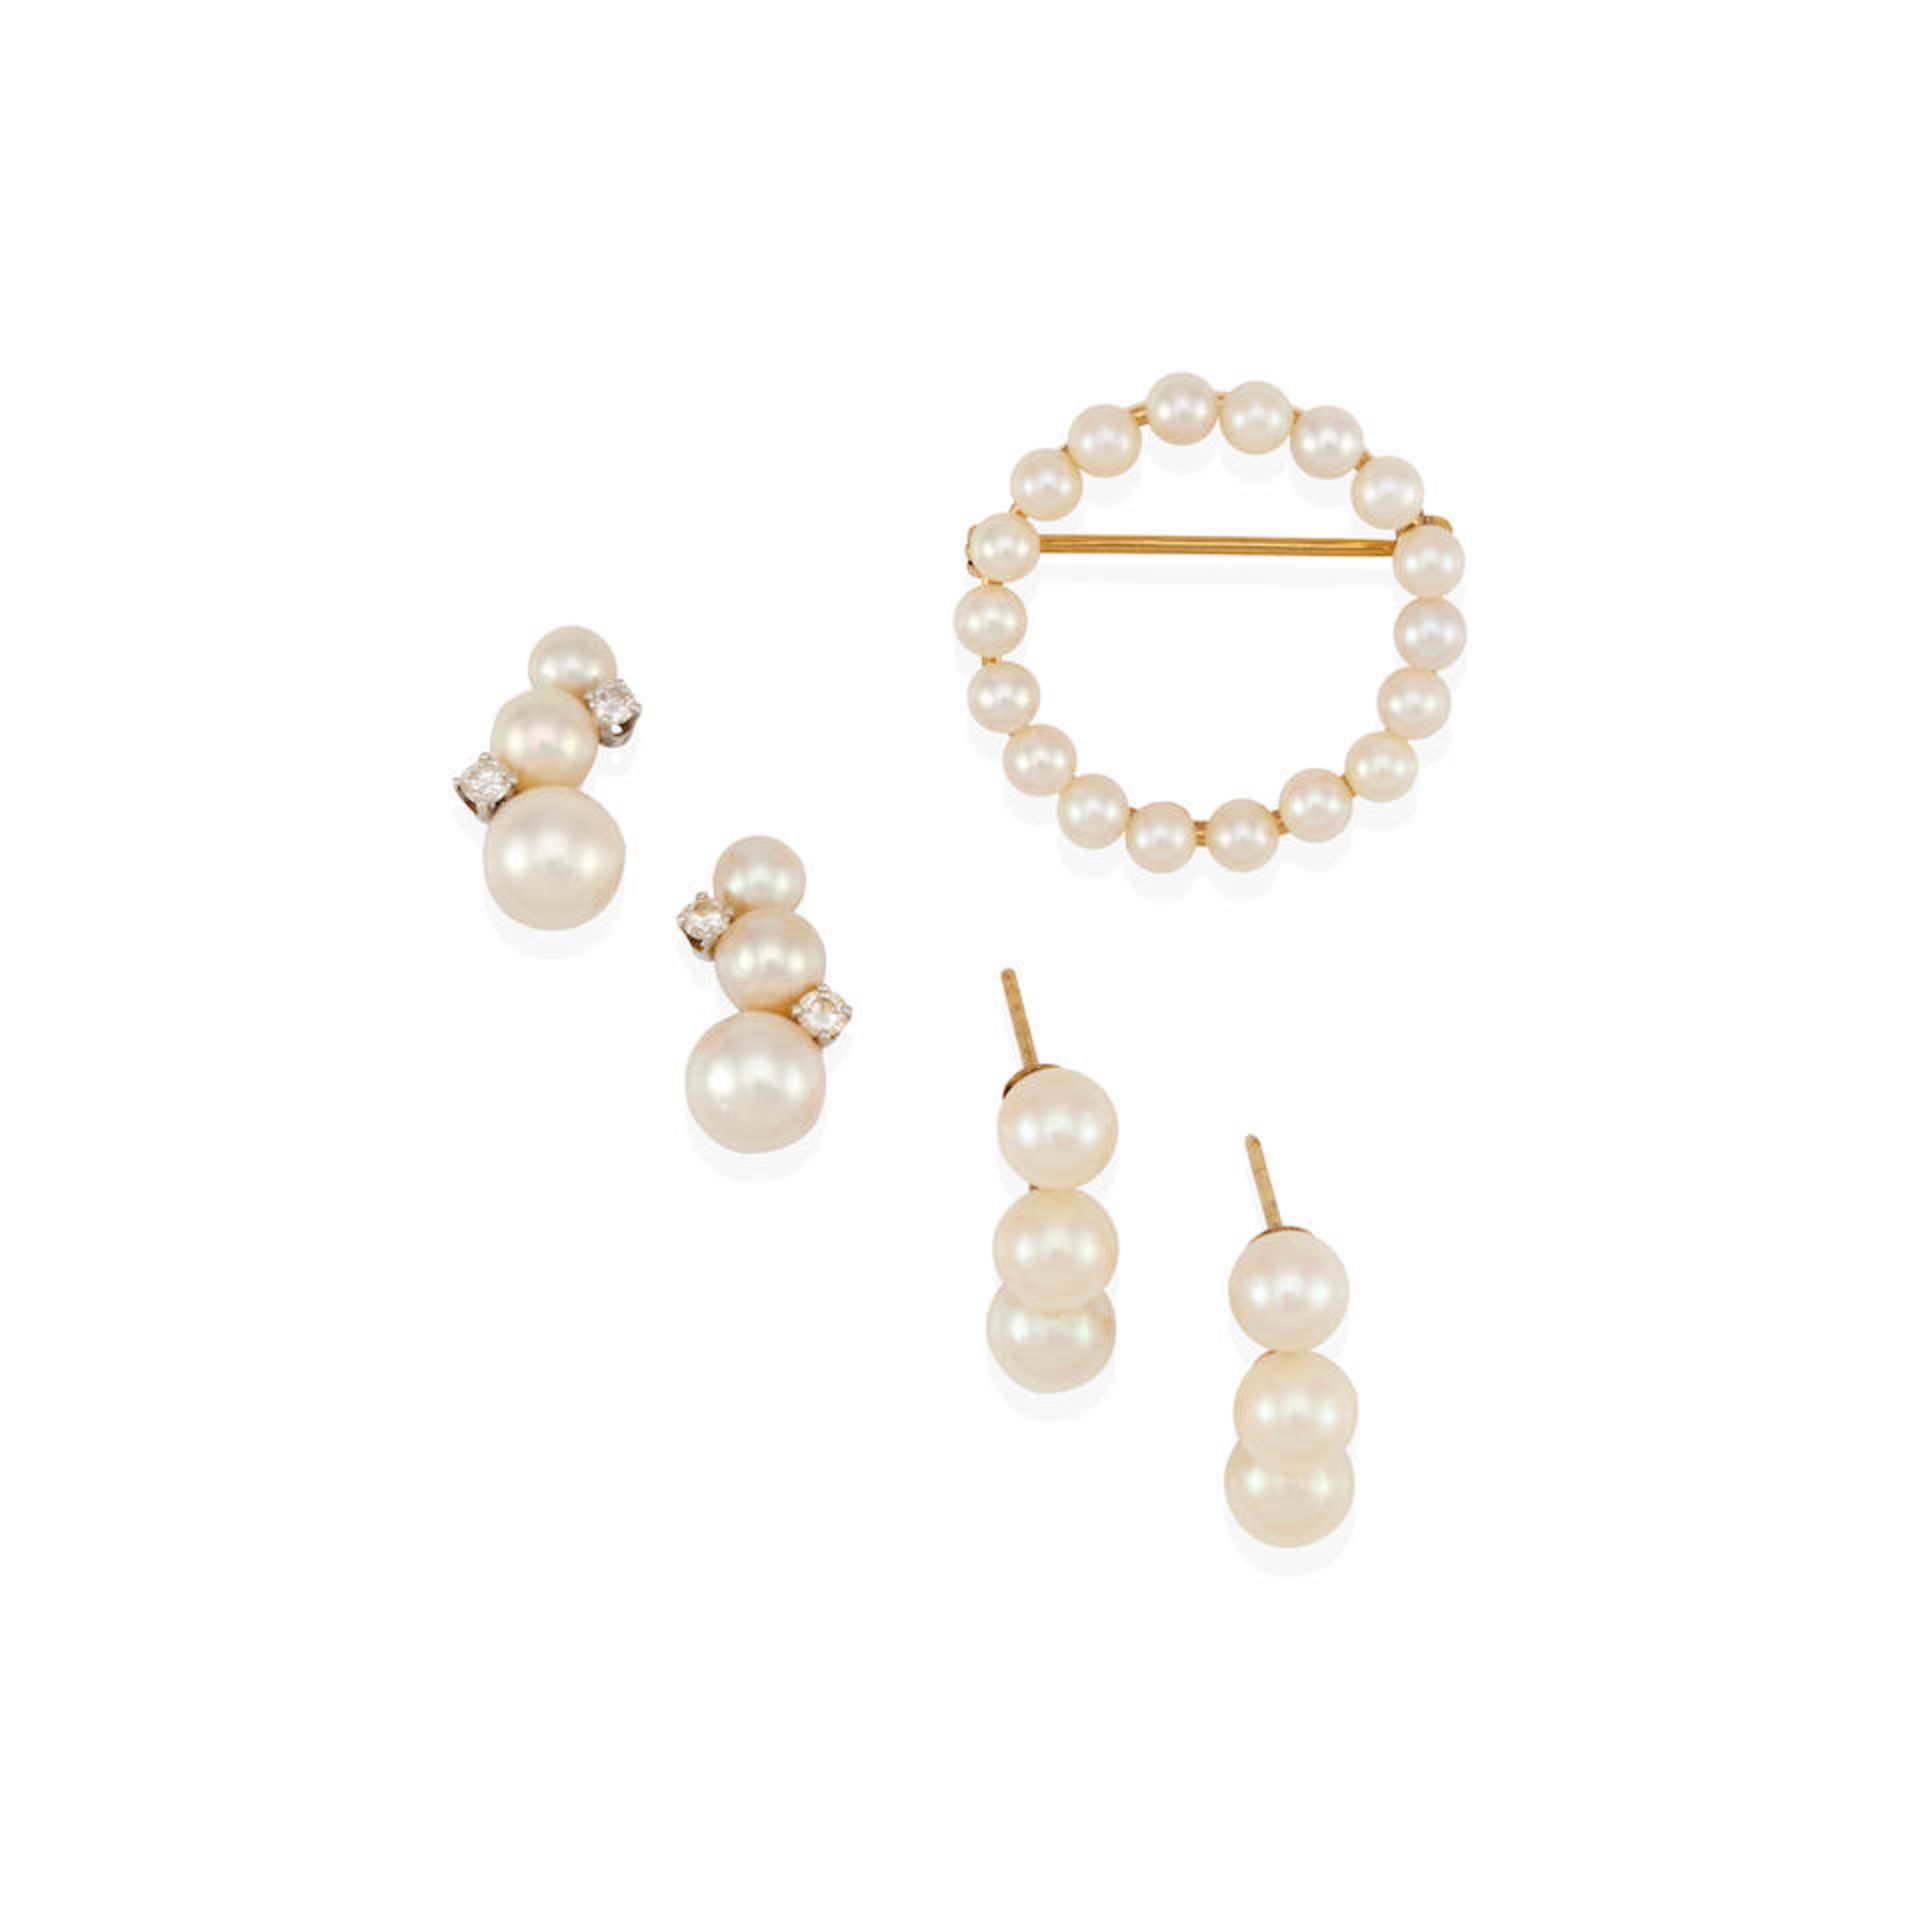 A GROUP OF 14K BI-COLOR GOLD, CULTURED PEARL AND DIAMOND JEWELRY